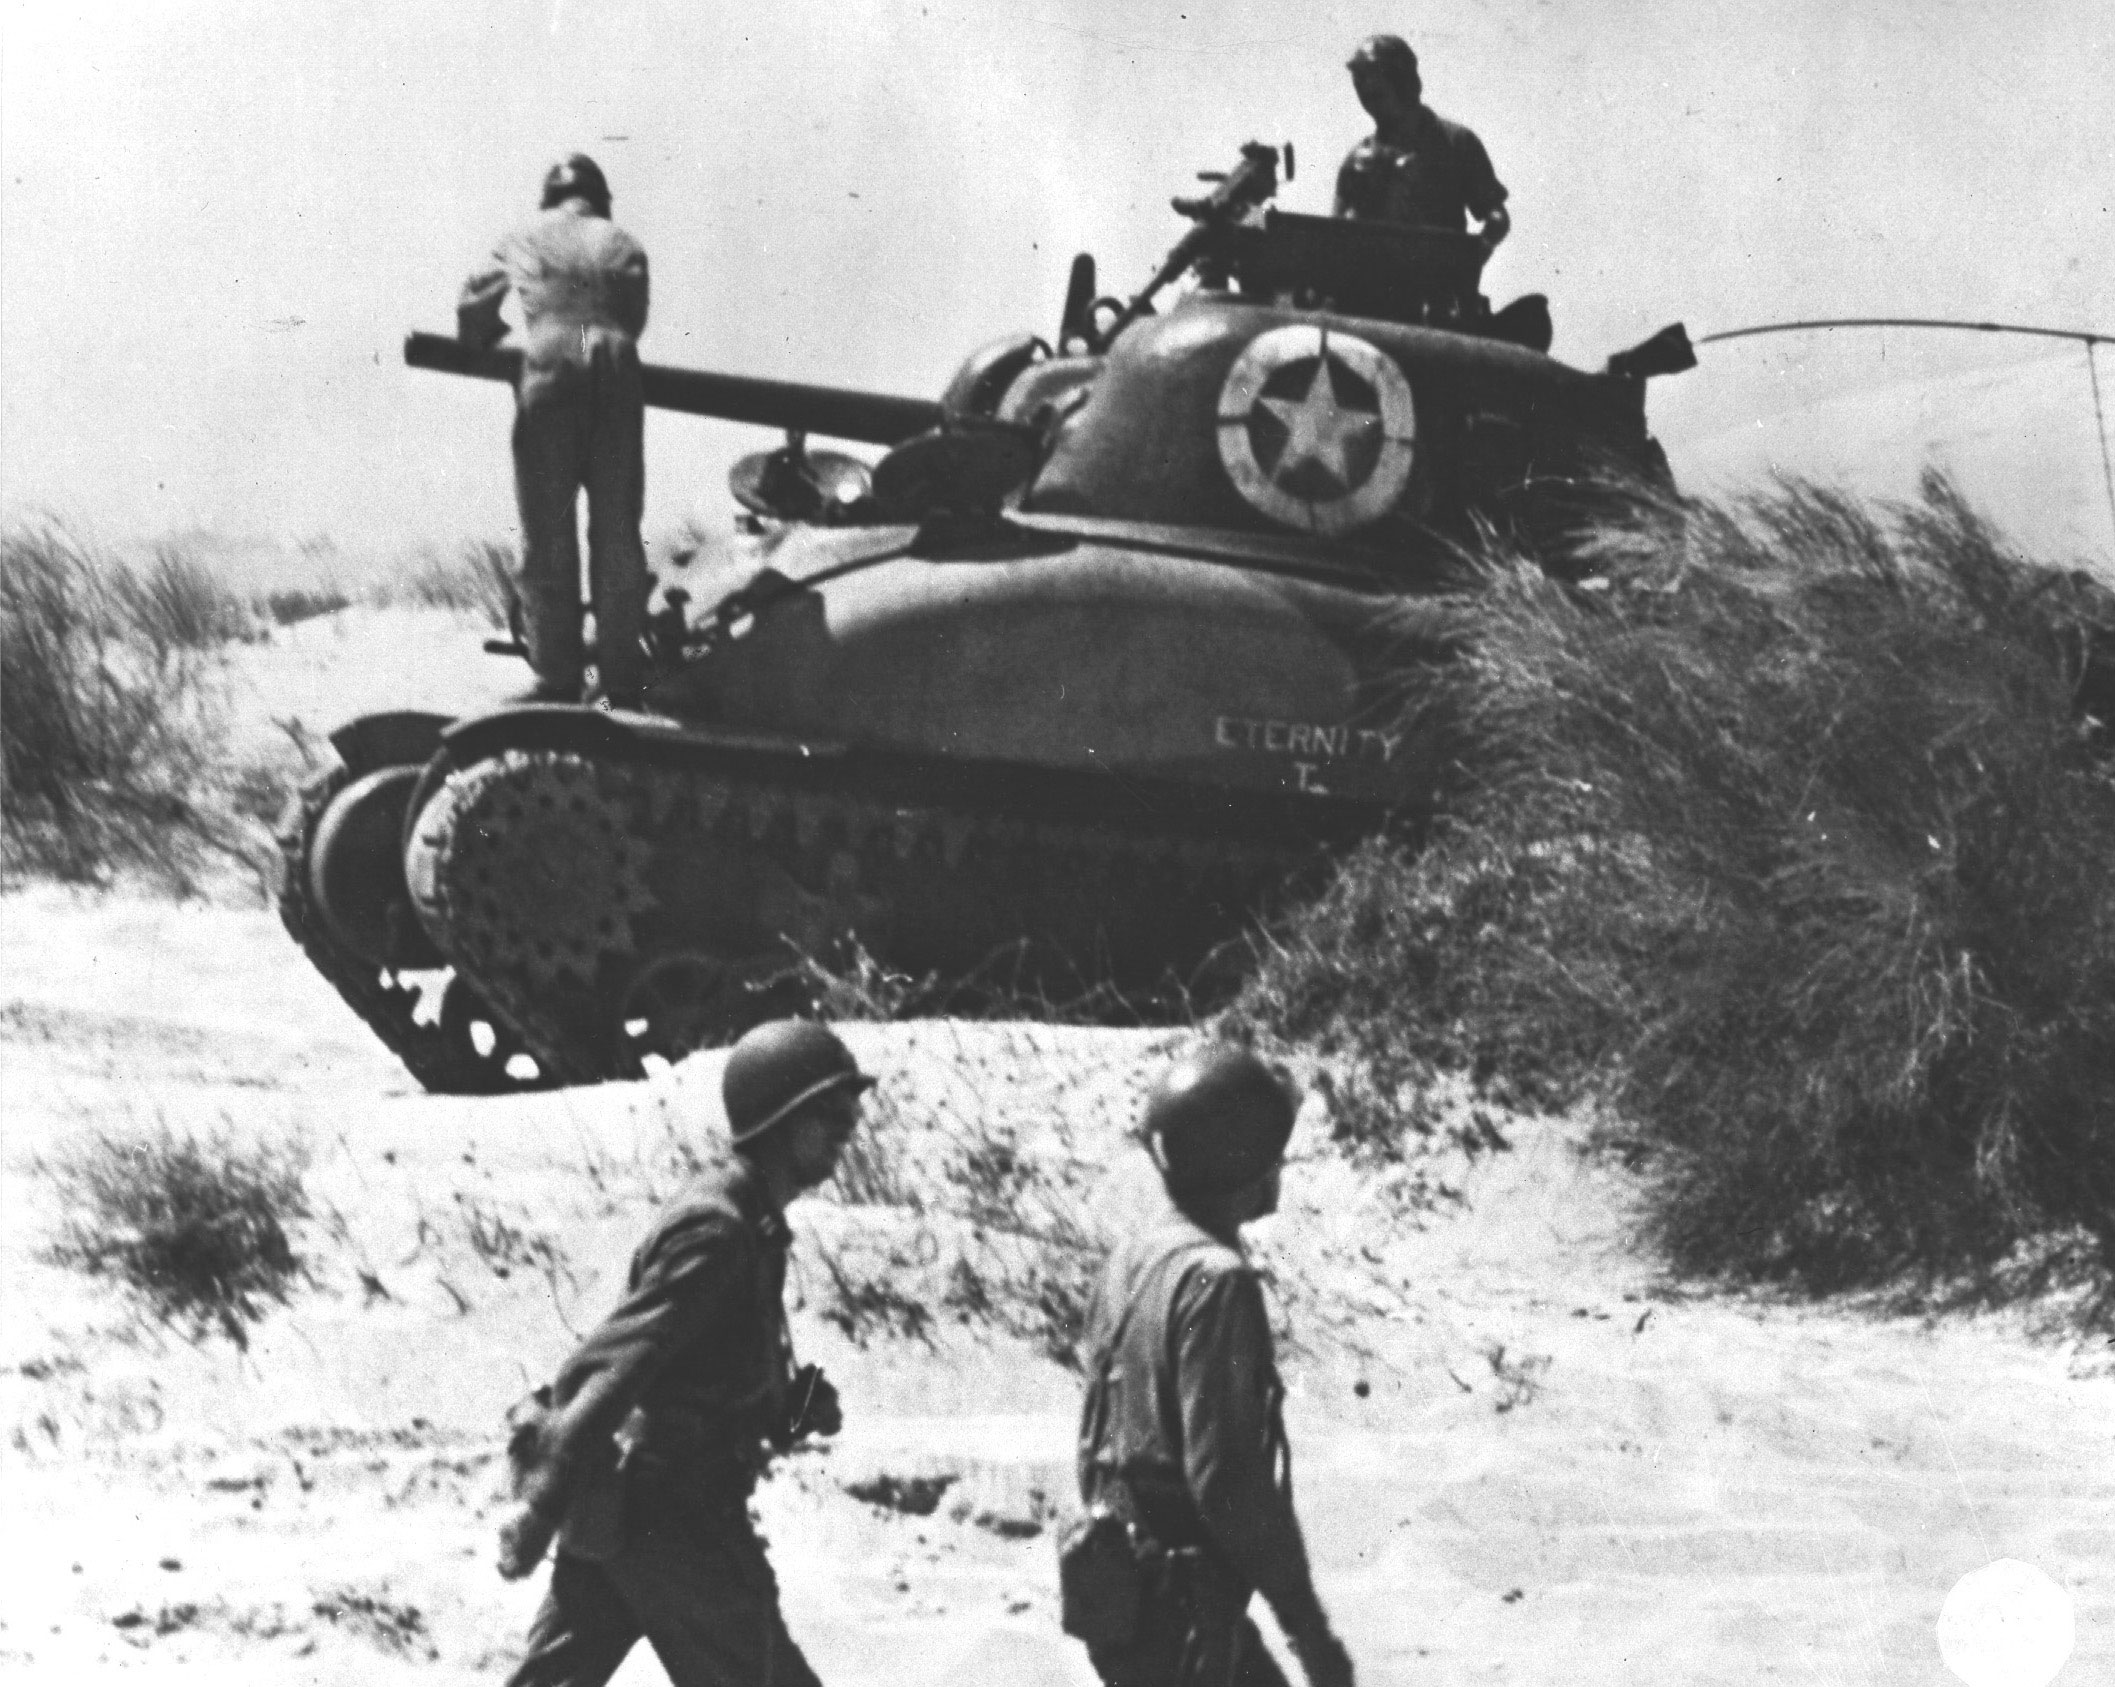 Crew of M4 Sherman tank 'Eternity' checking the tank after landing at Red Beach 2, Sicily, 10 Jul 1943